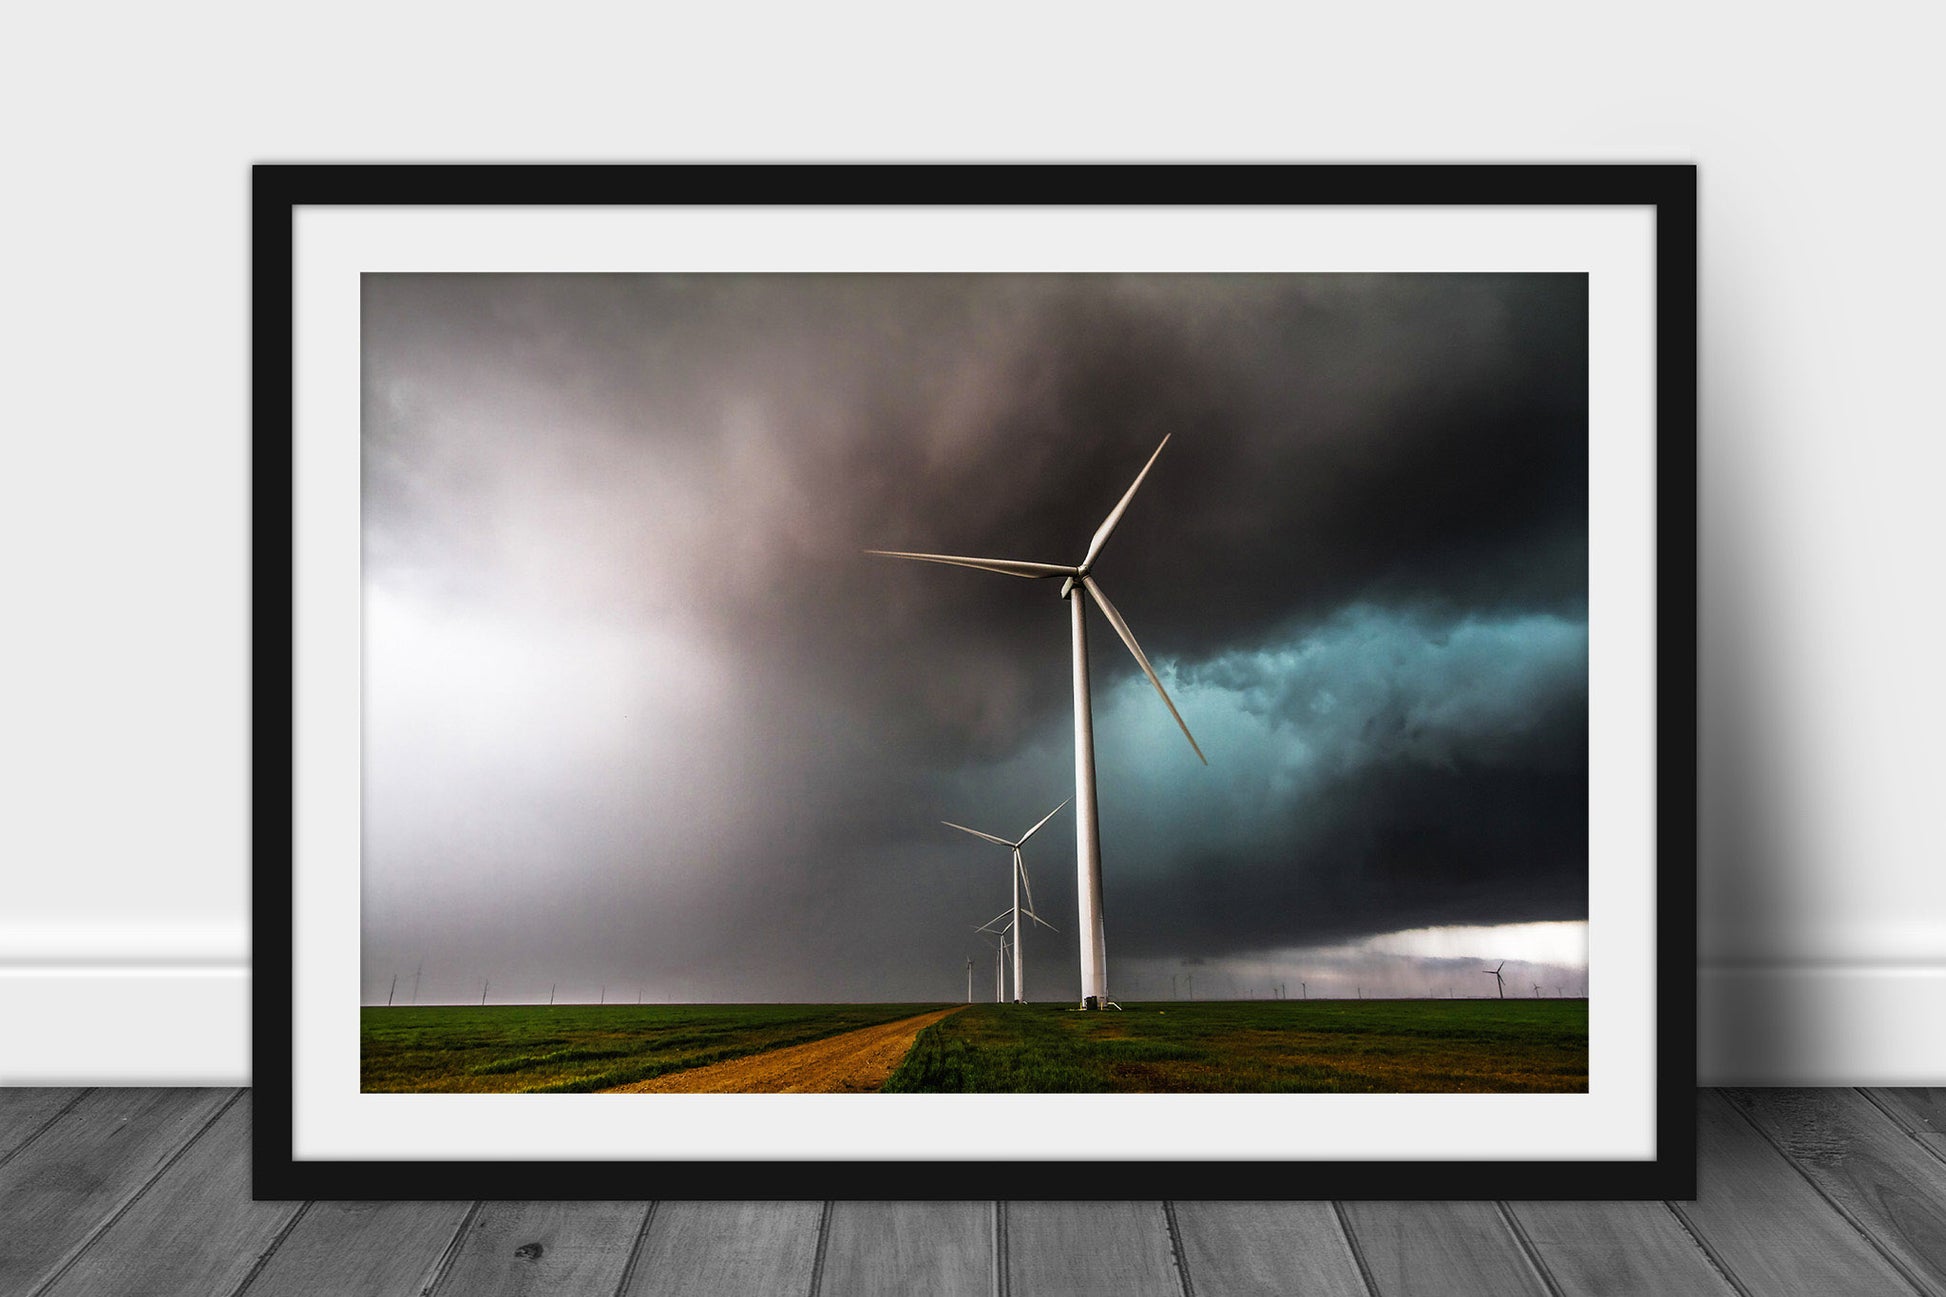 Framed wind farm print of wind turbines churning through an intense thunderstorm on a stormy spring day in the Texas panhandle by Sean Ramsey of Southern Plains Photography.